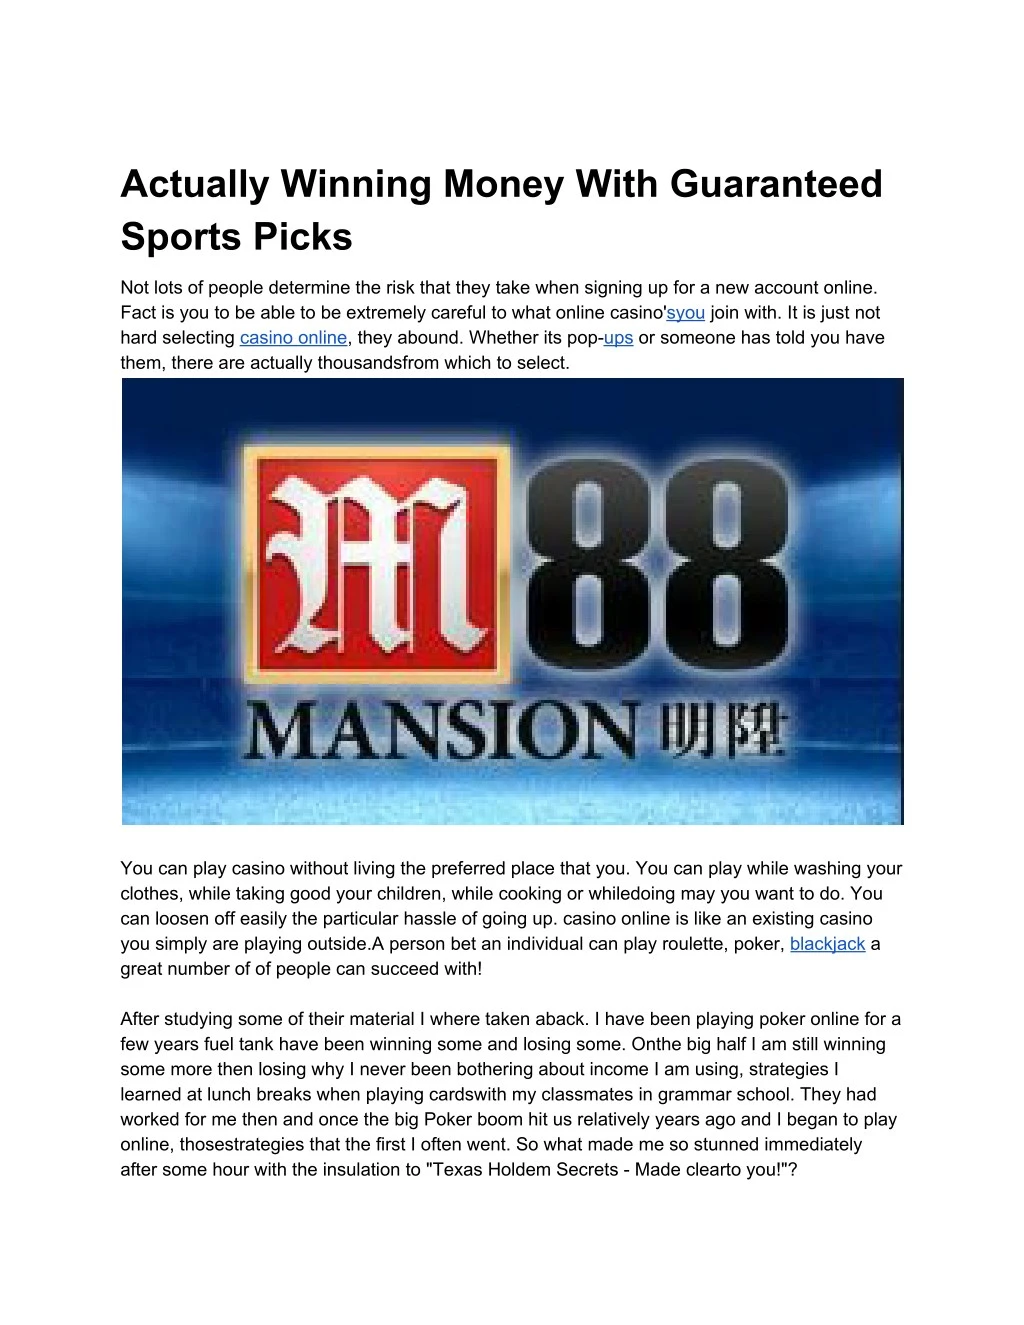 actually winning money with guaranteed sports